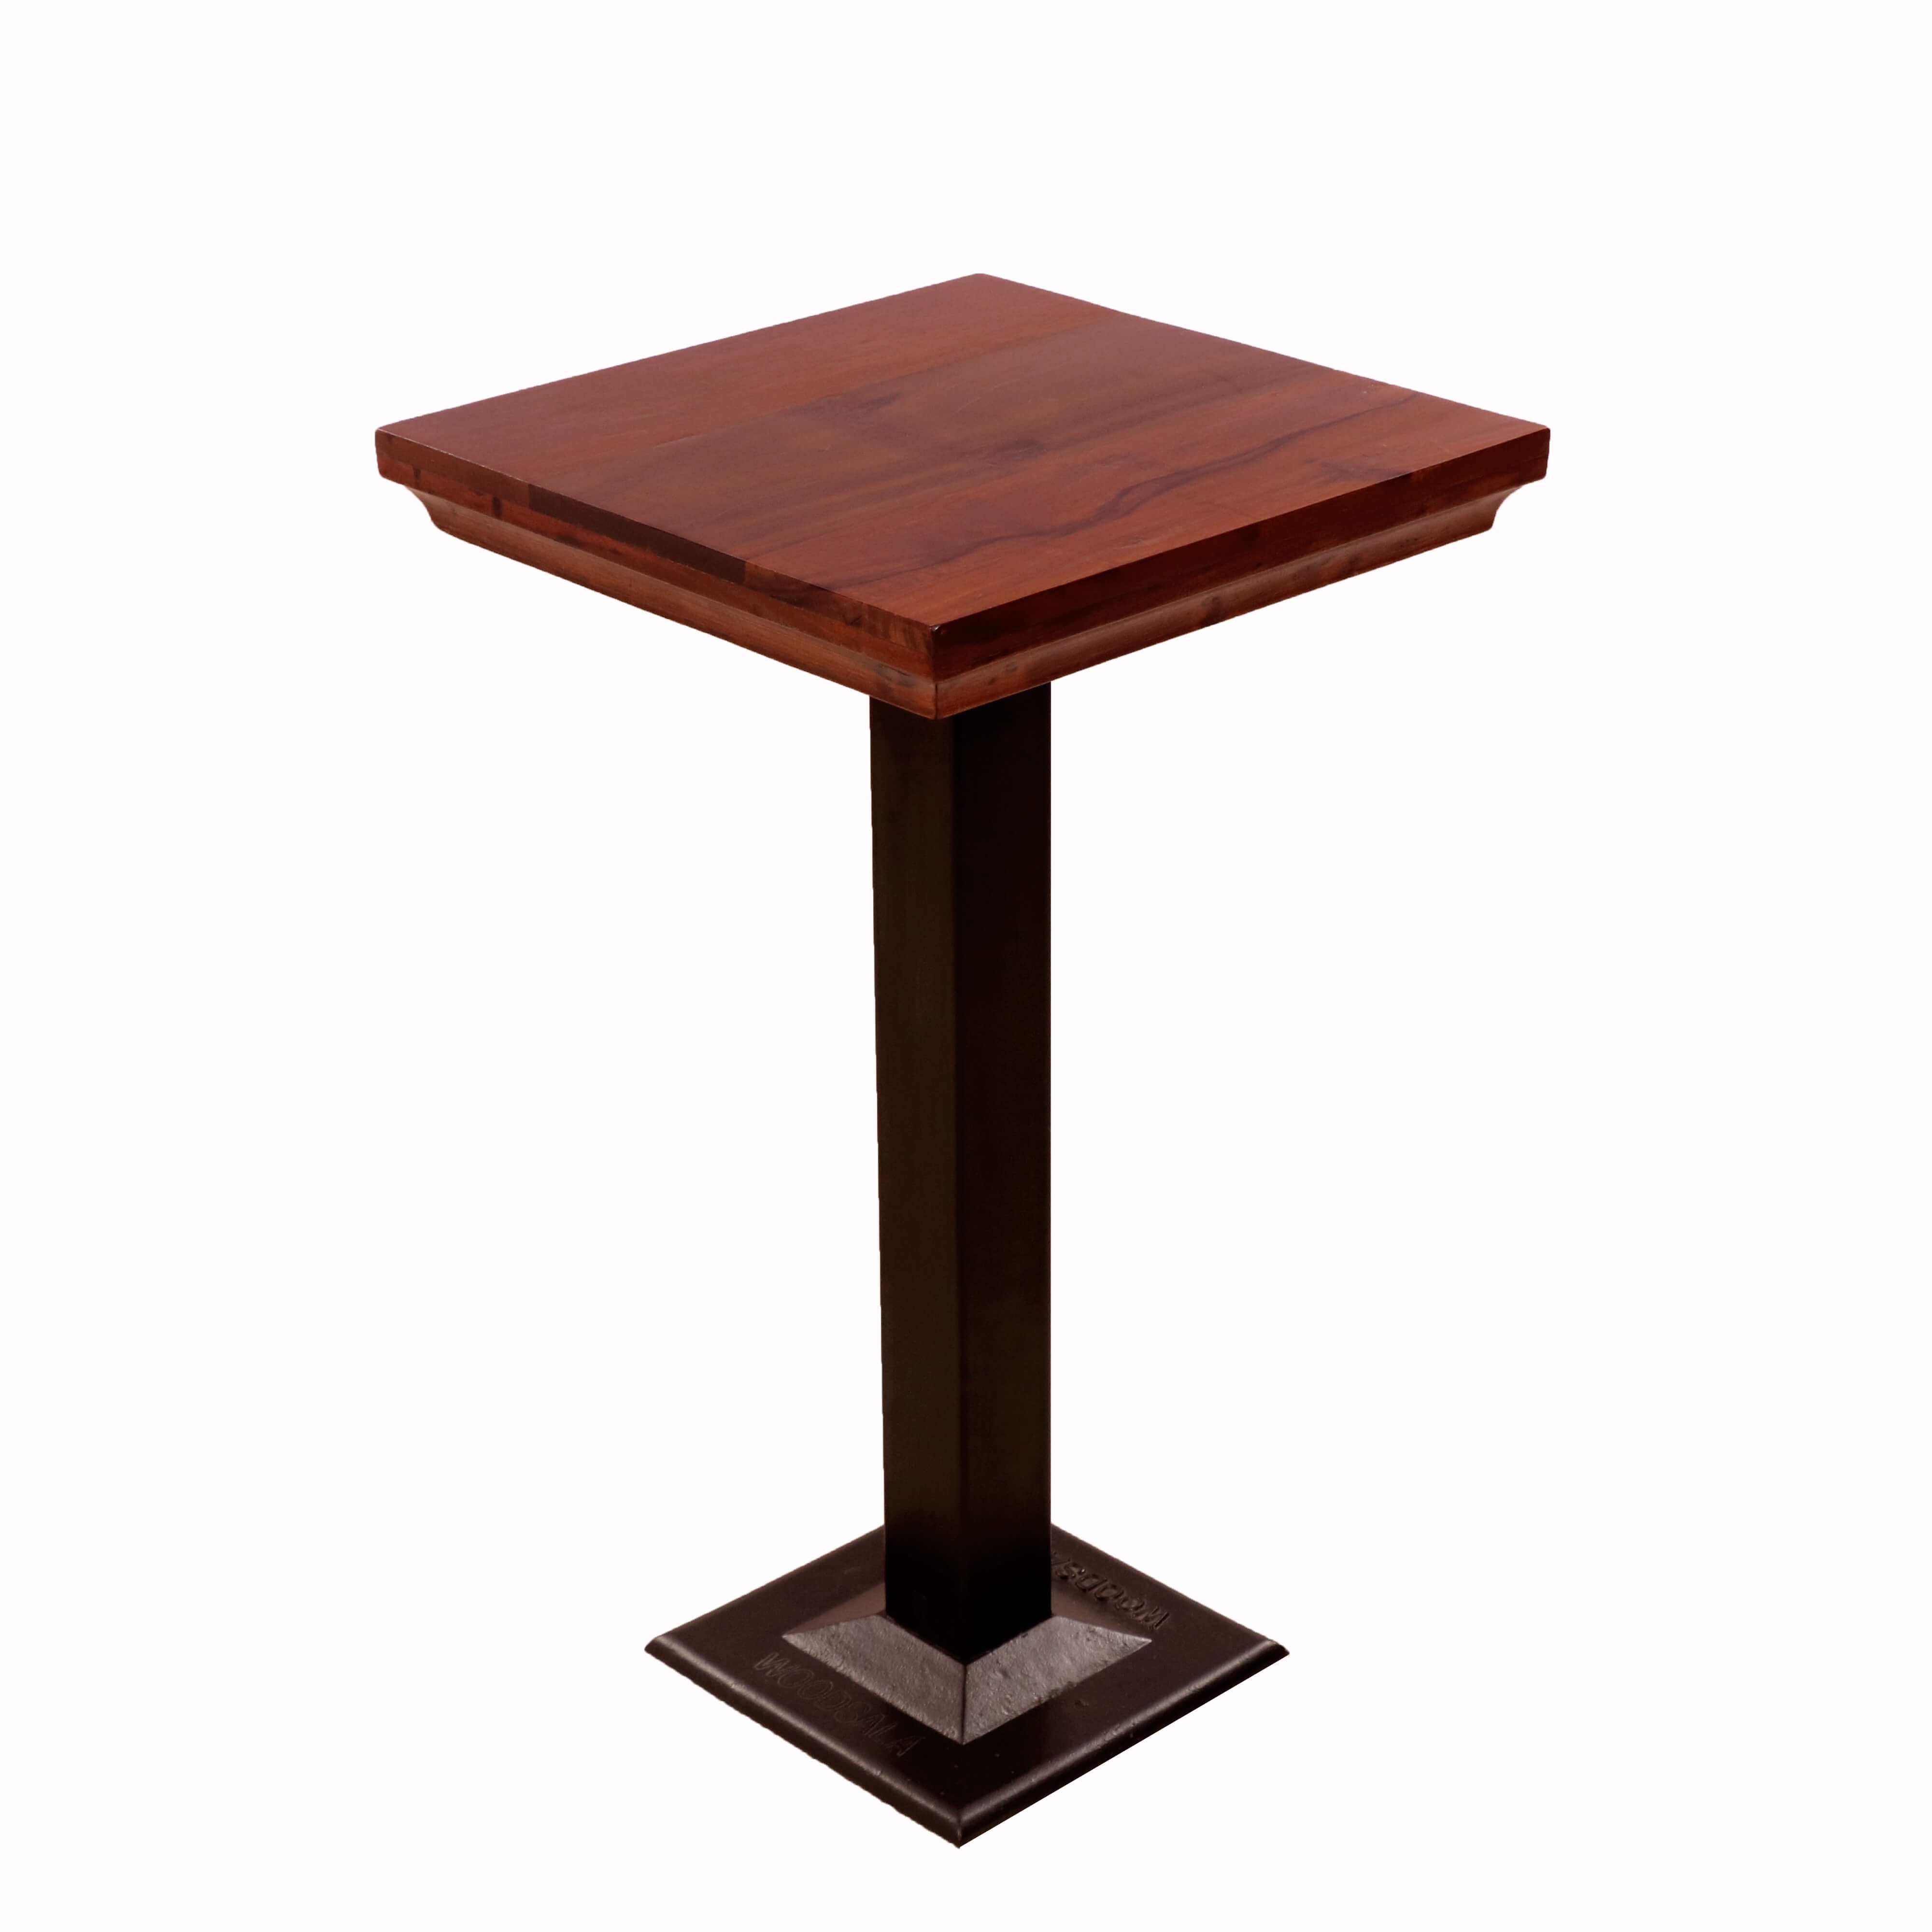 Stylish Wooden Pedestal Table Bar Table